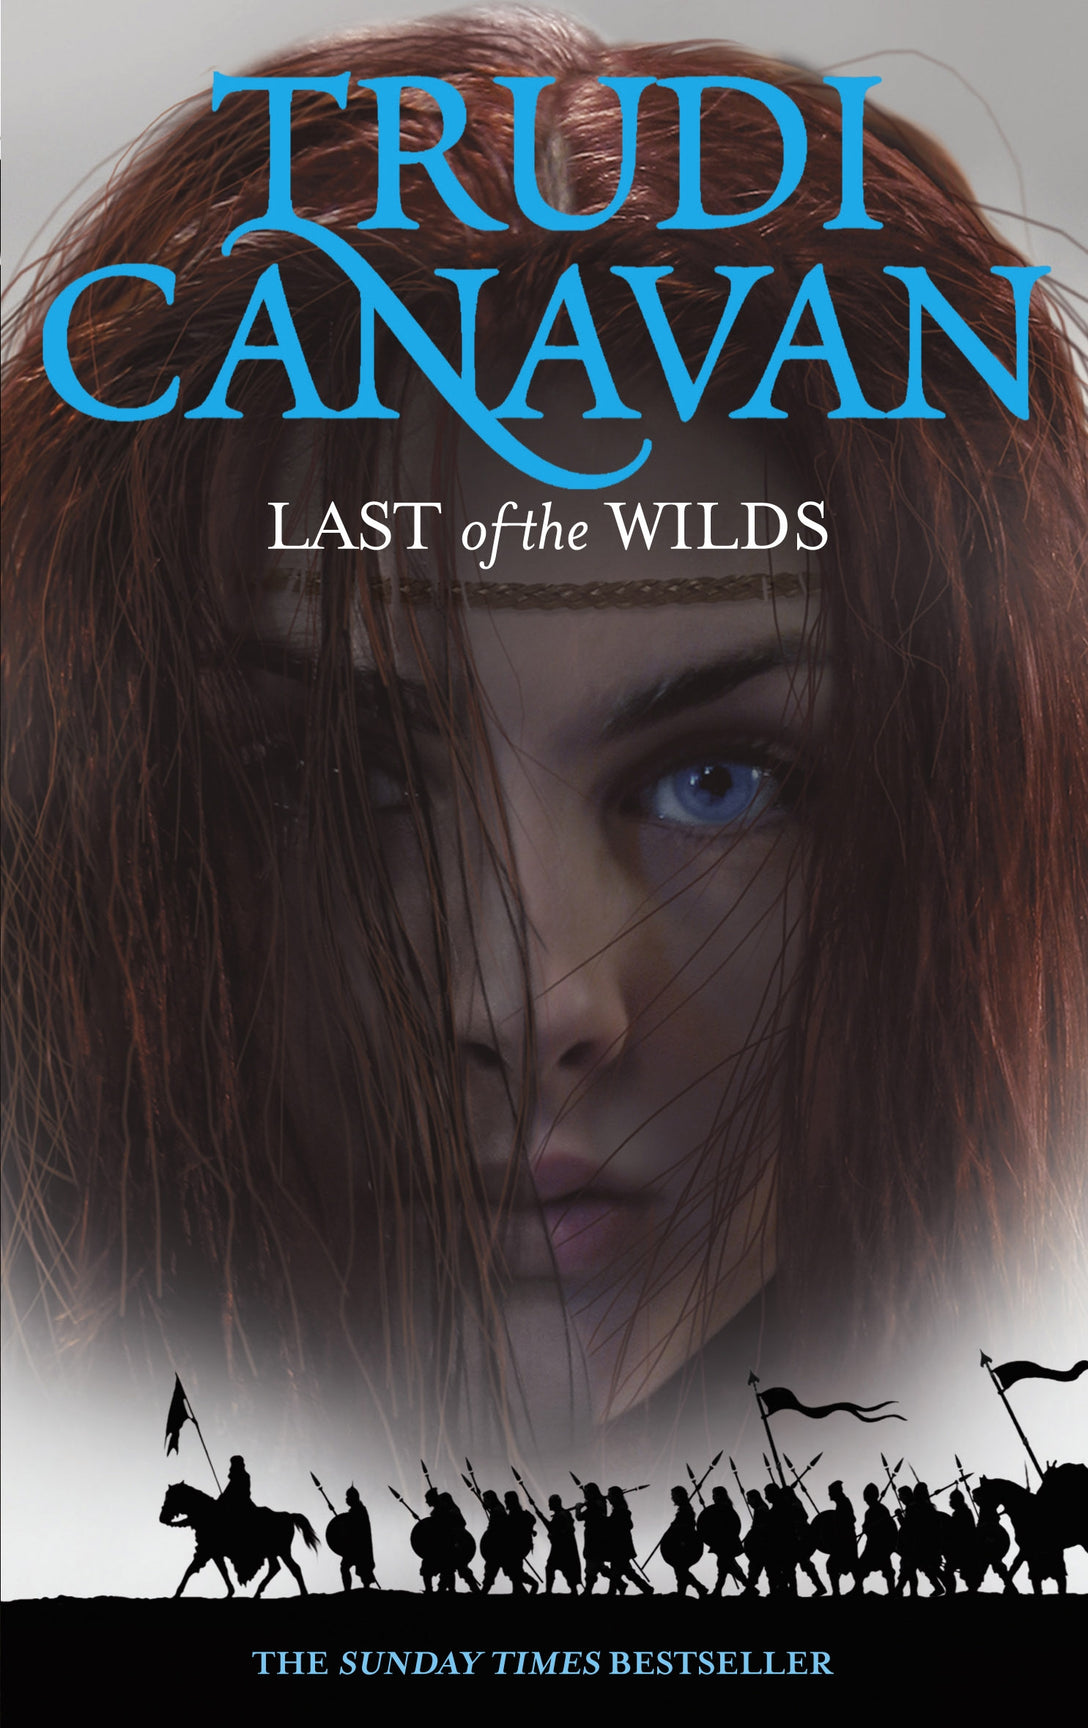 Last Of The Wilds by Trudi Canavan